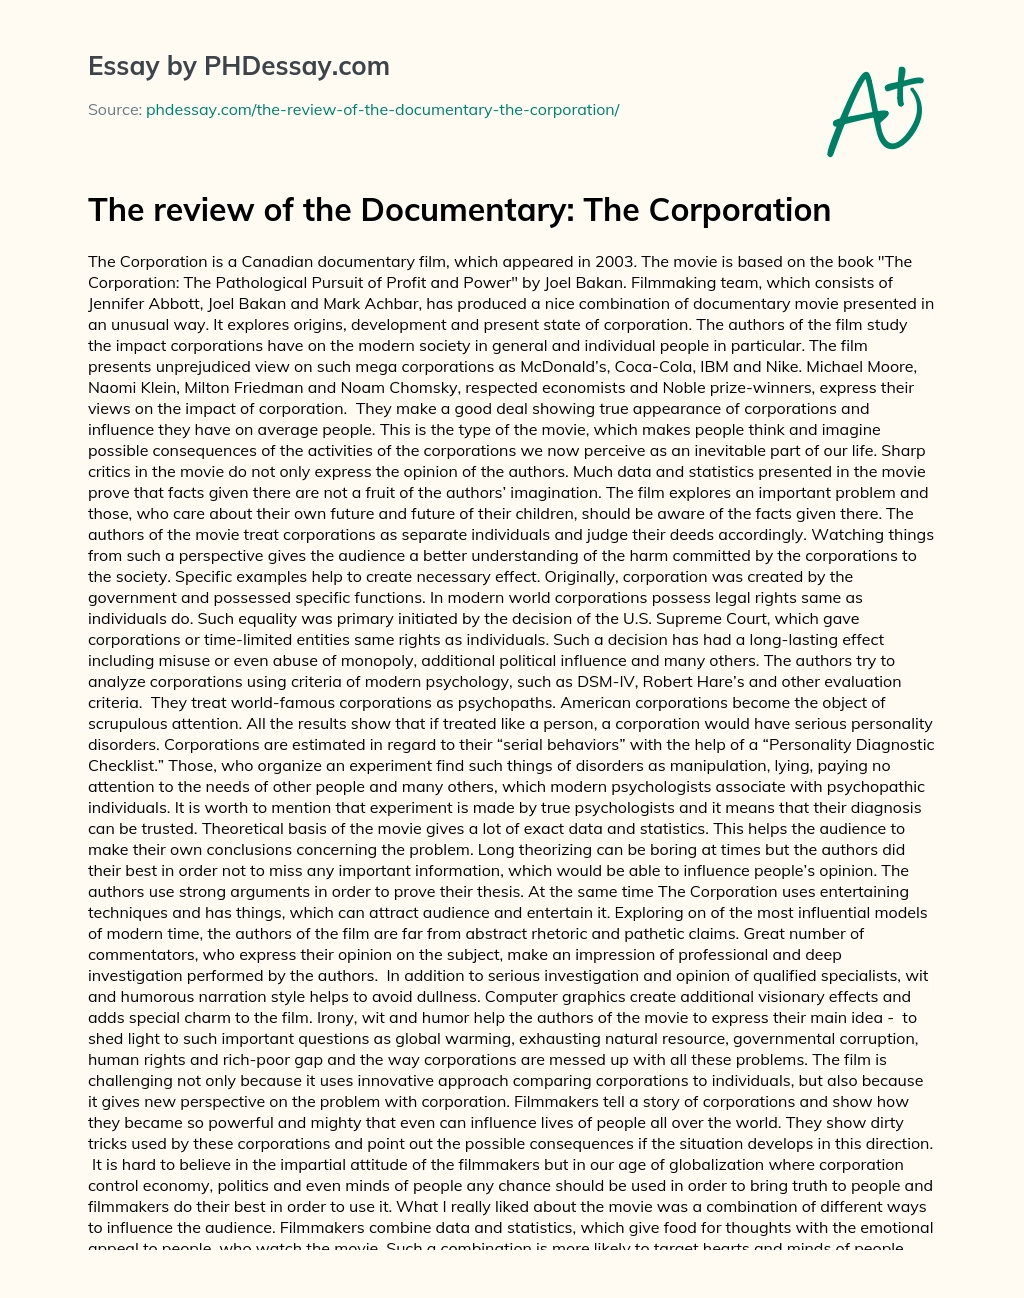 The review of the Documentary: The Corporation essay